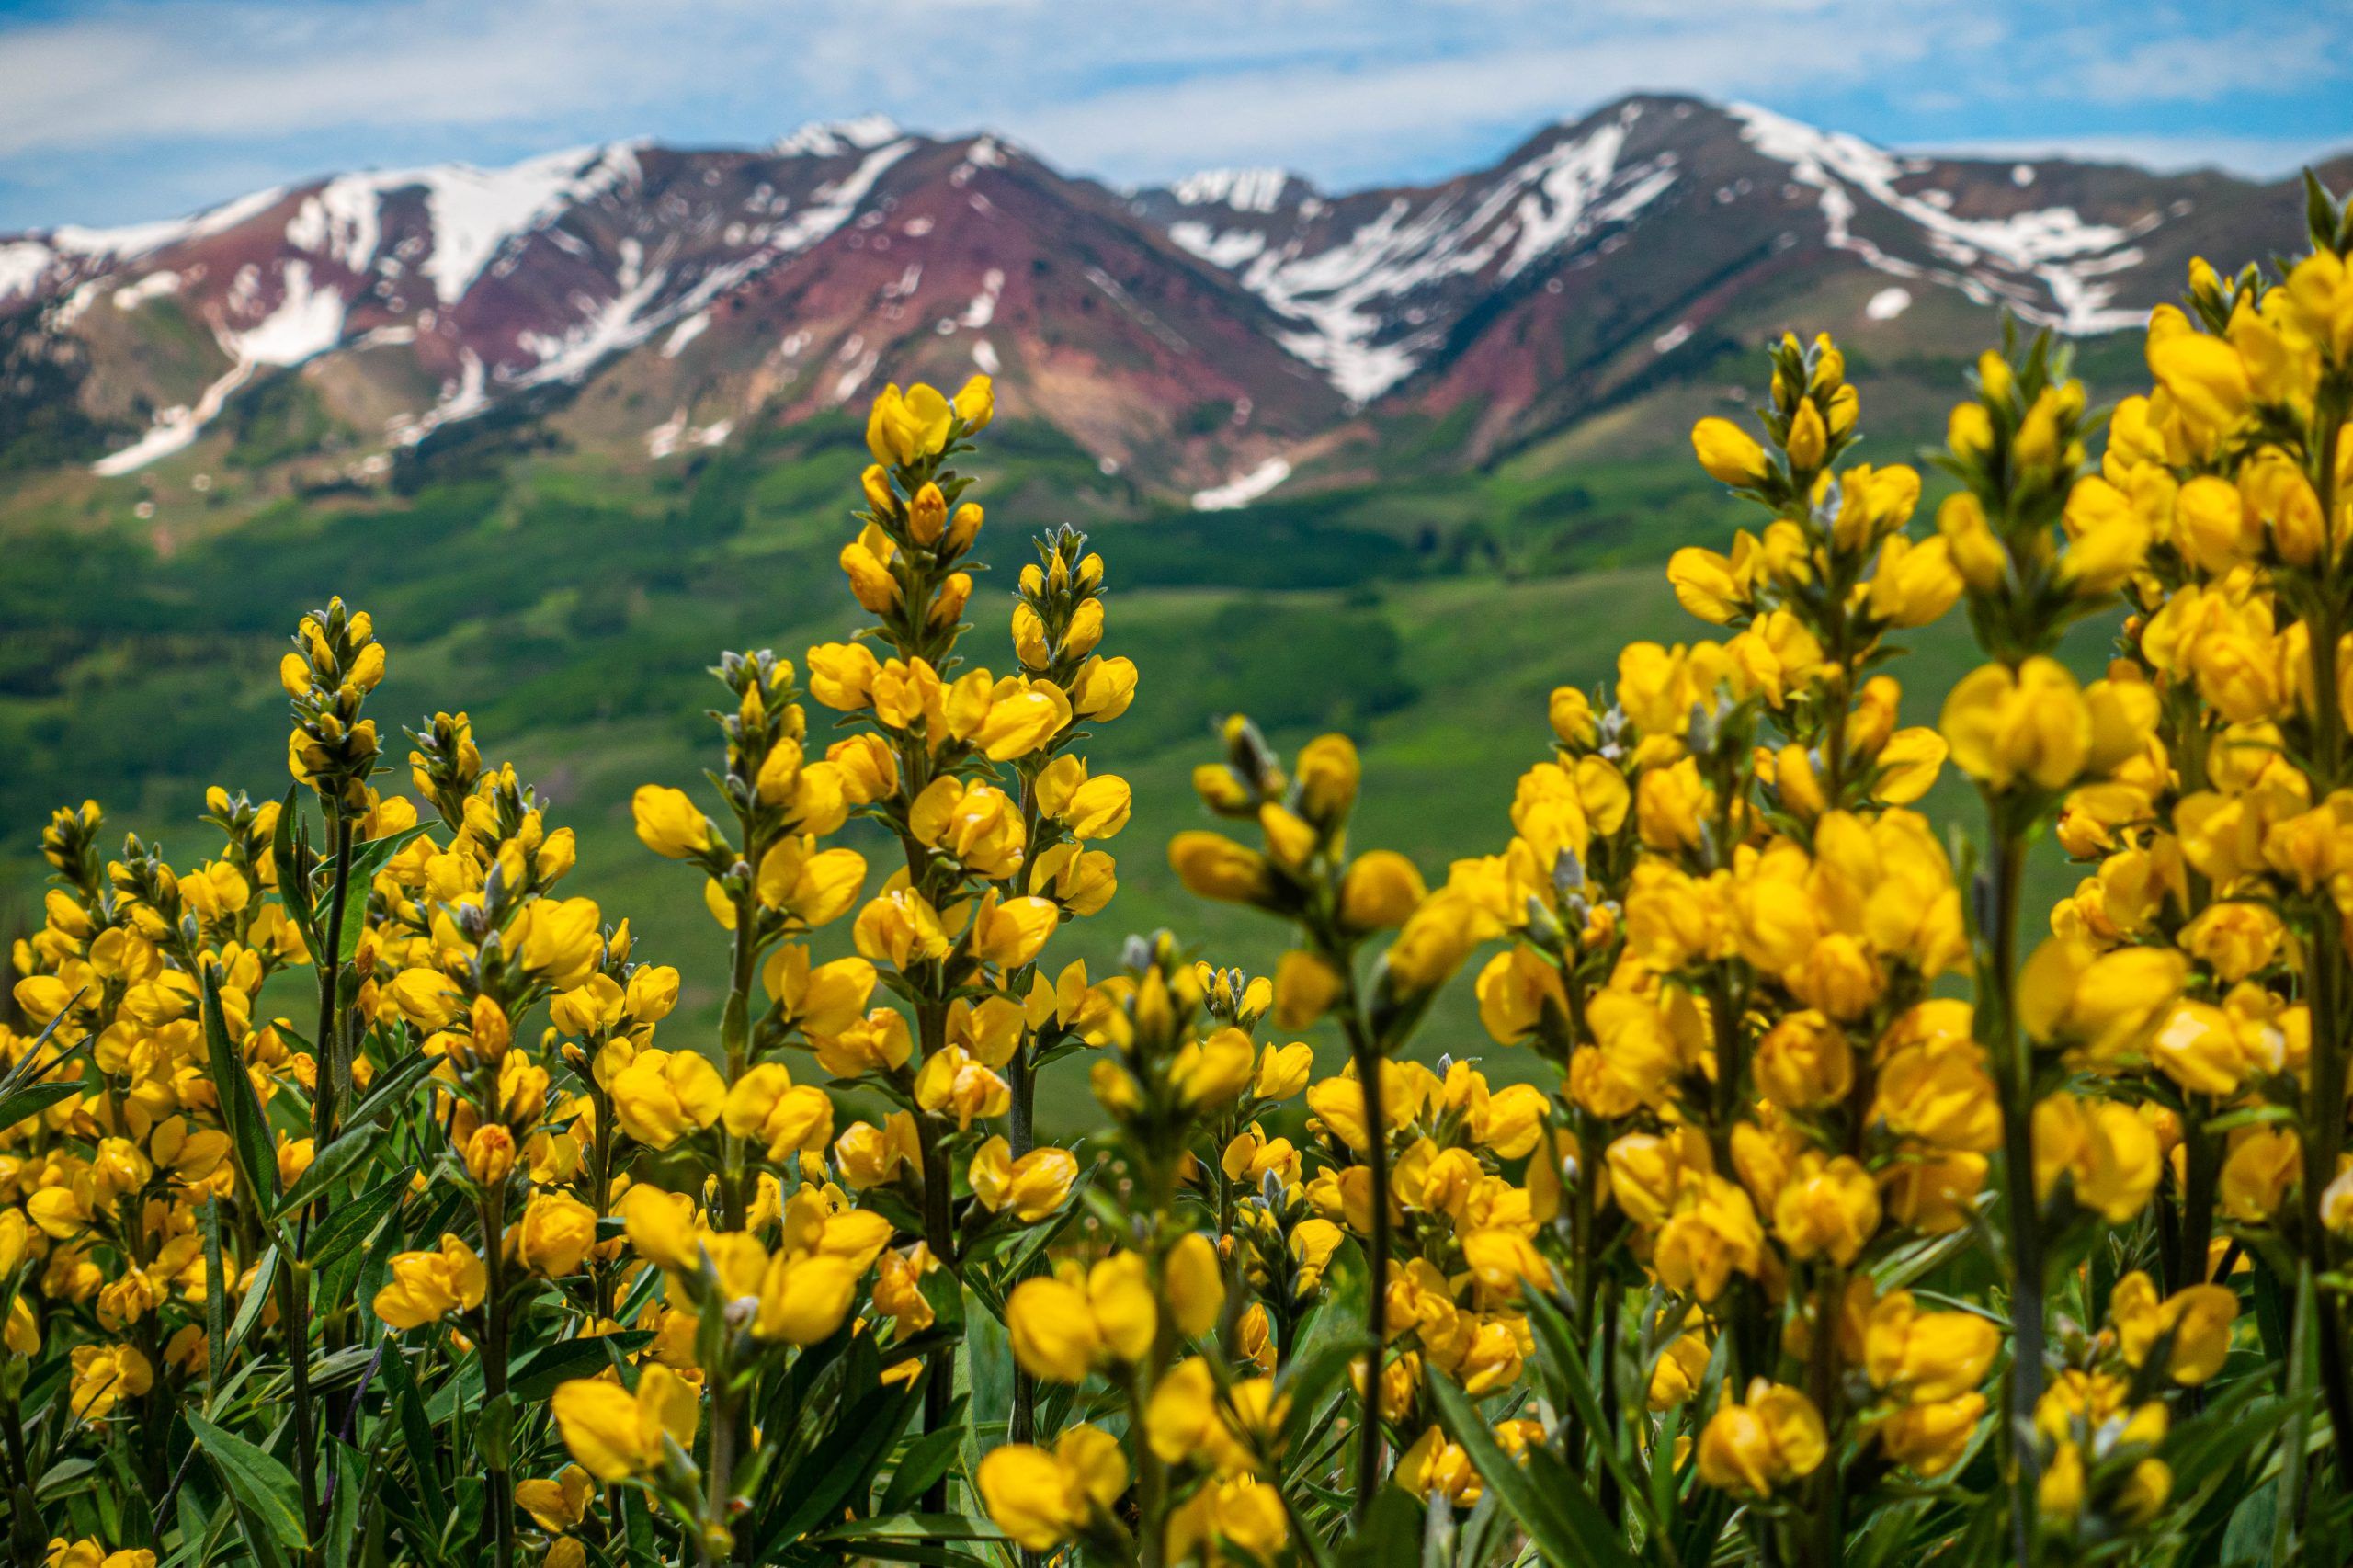 a cluster of yellow flowers with round blooms on a stalk is in the foreground in front of snow-dusted mountain peaks.